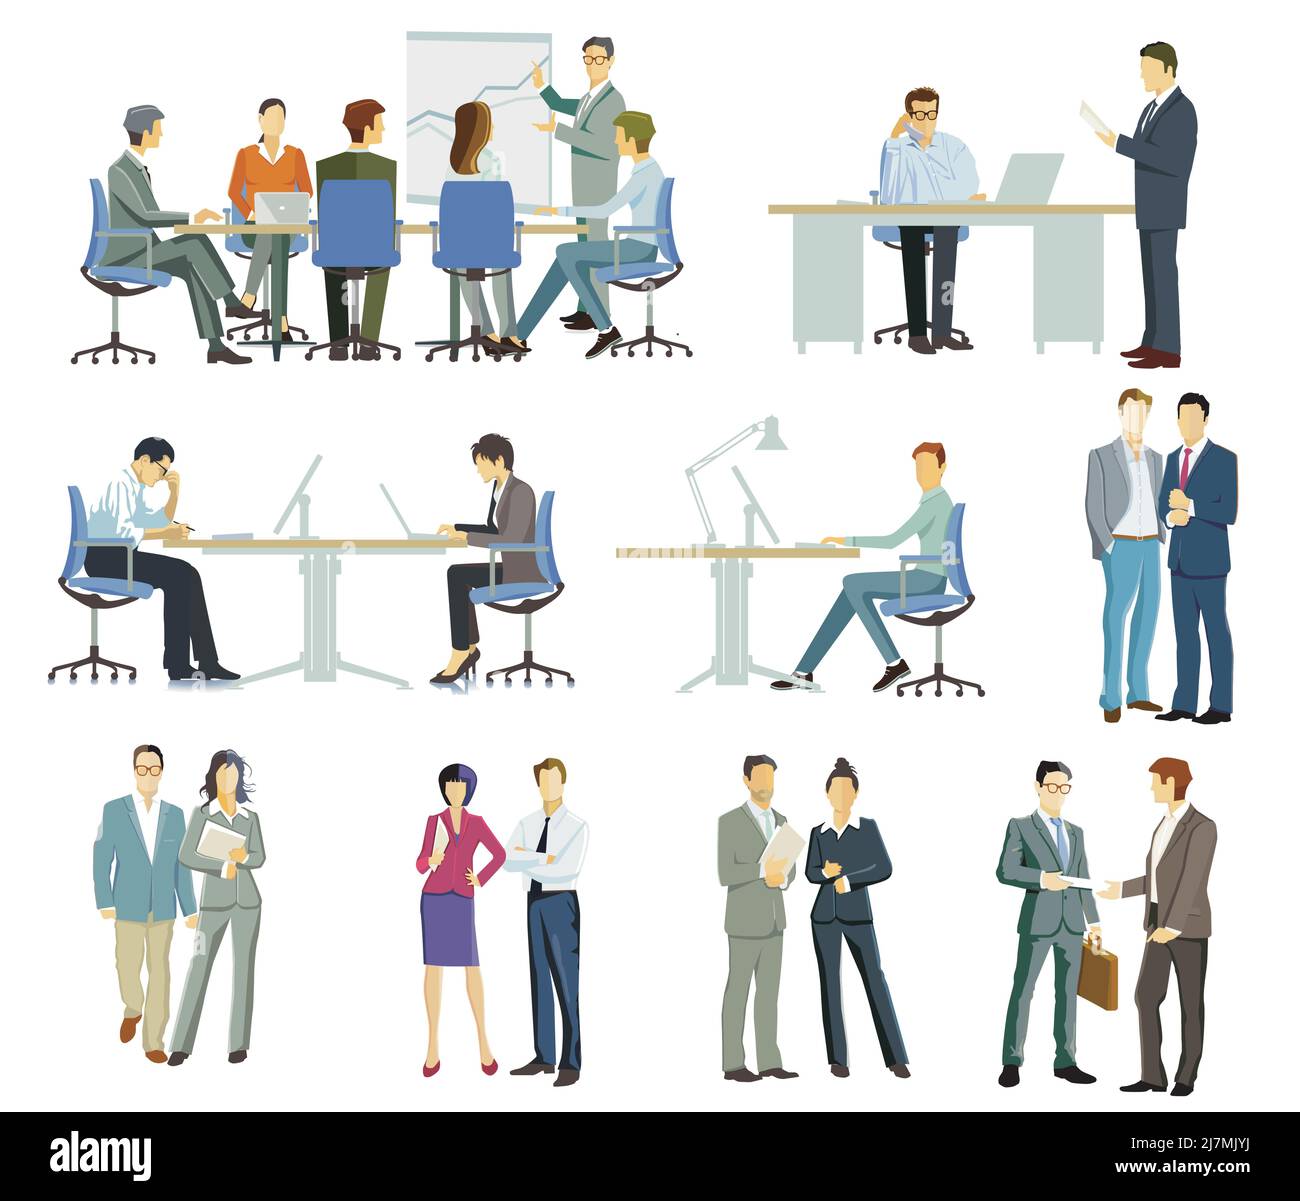 Team consulting, business meeting illustration Stock Vector